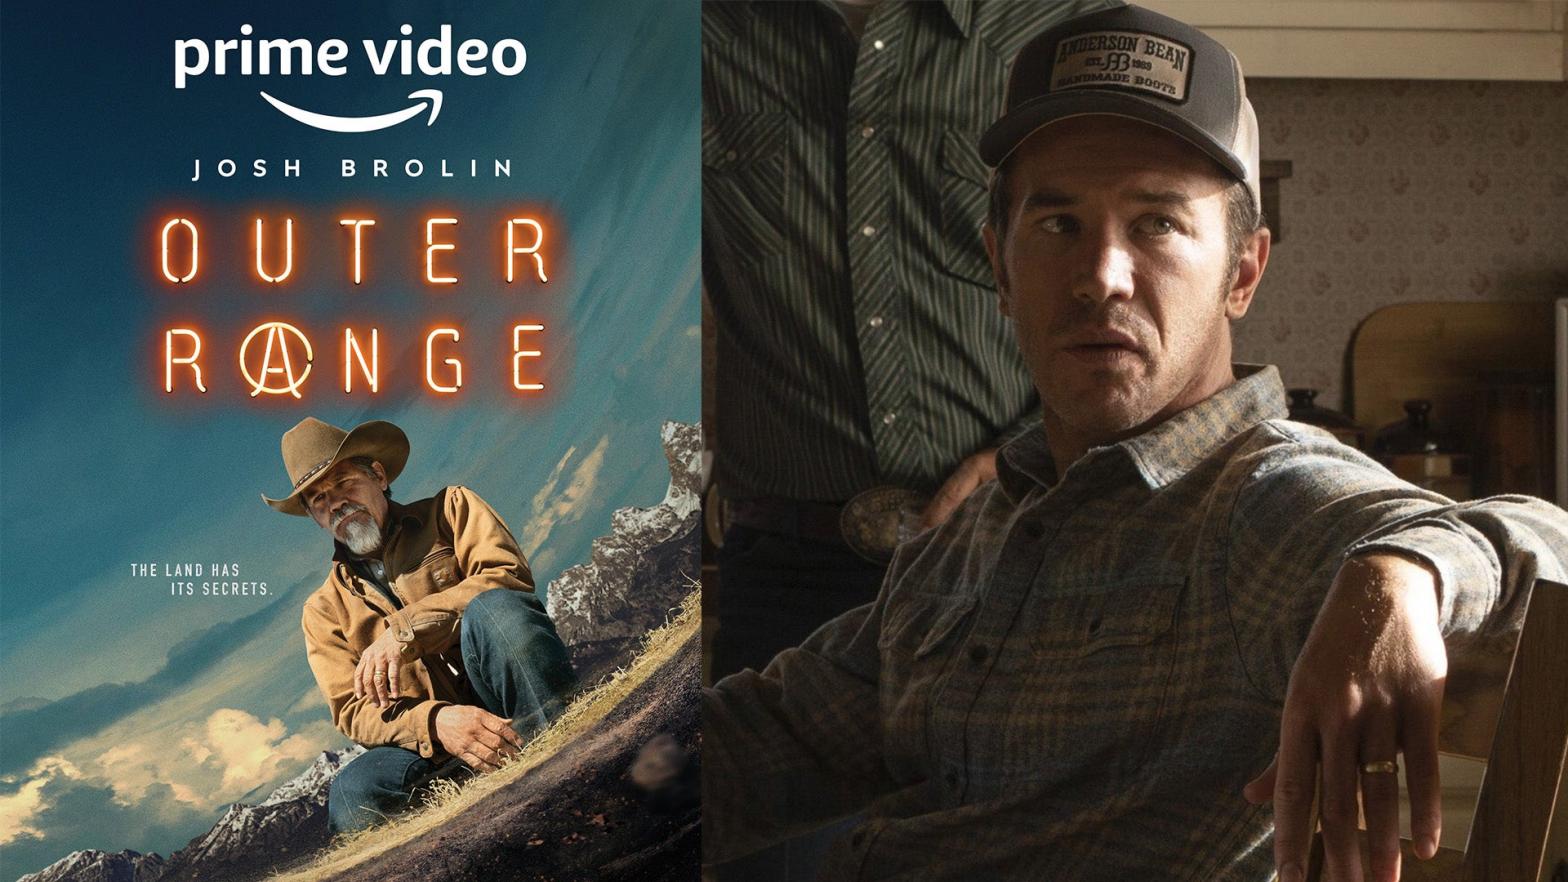 Tom Pelphrey on Playing a Sci-Fi Cowboy in Outer Range